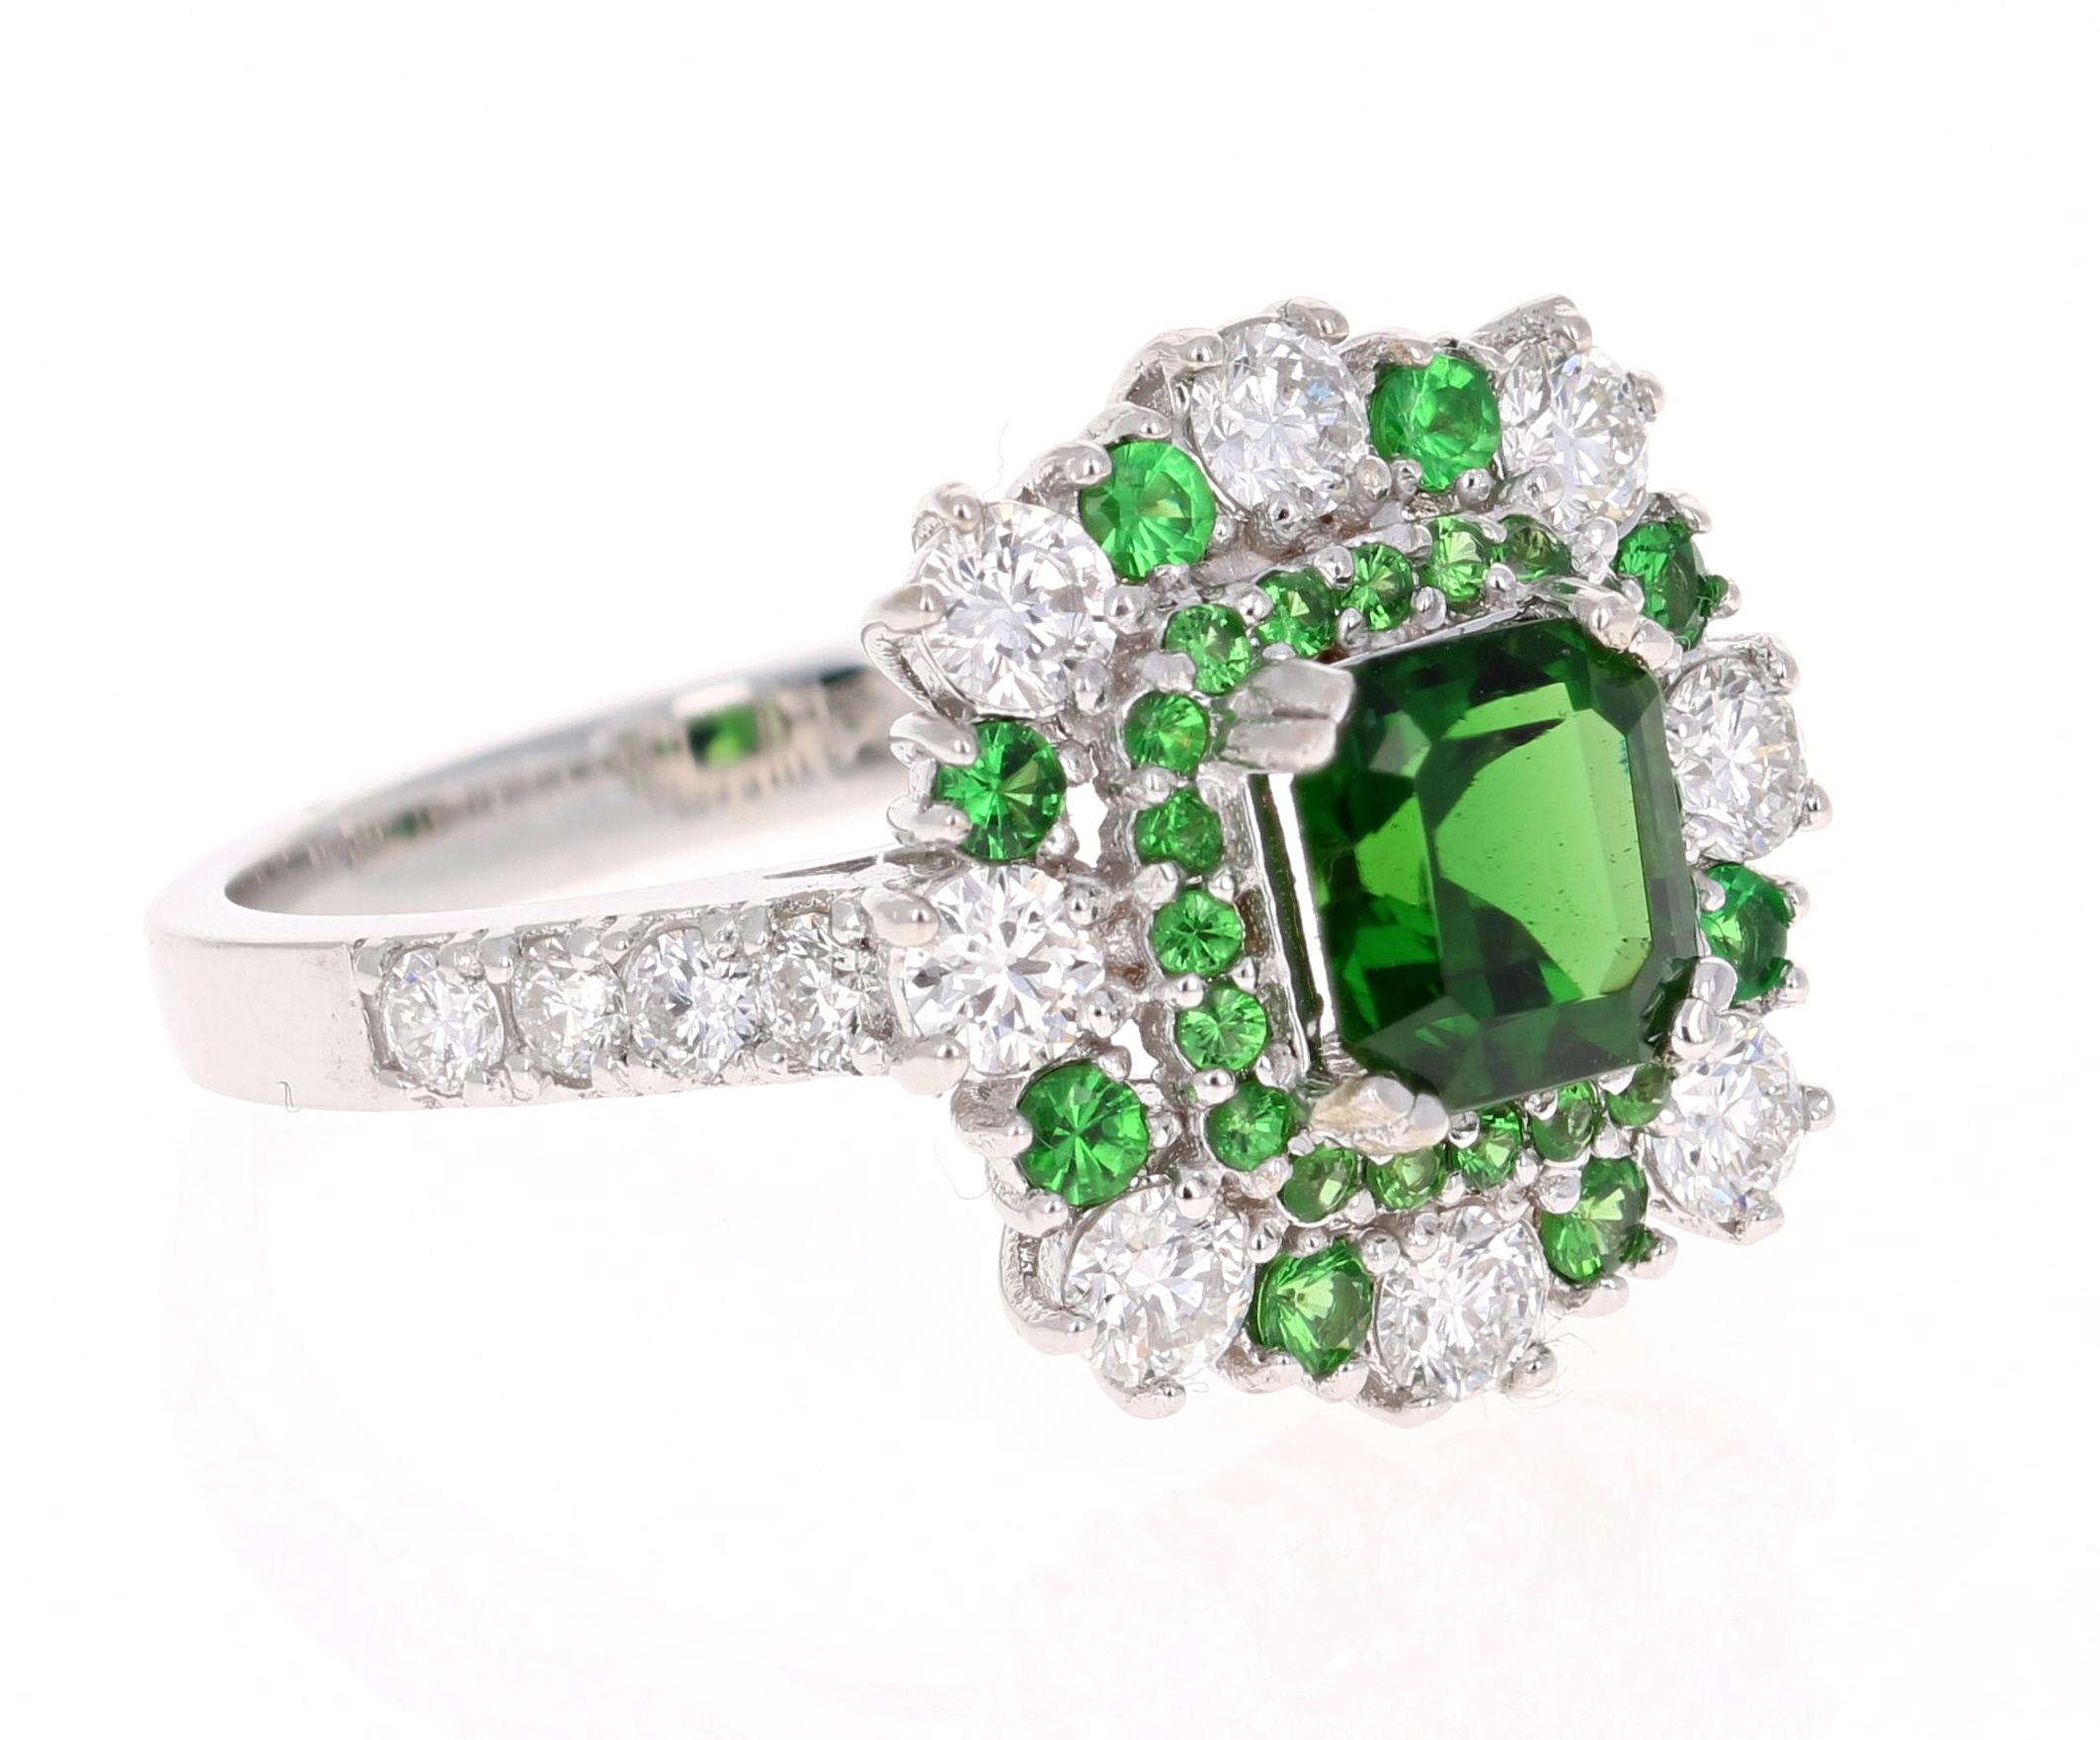 This beautiful ring has a Asscher Cut Tsavorite that is 1.05 Carats. It is embellished with 28 Round Cut Tsavorites that weigh 0.47 Carats and 16 Round Cut Diamonds that weigh 0.91 Carats. The total carat weight of the ring is 2.43 Carats.